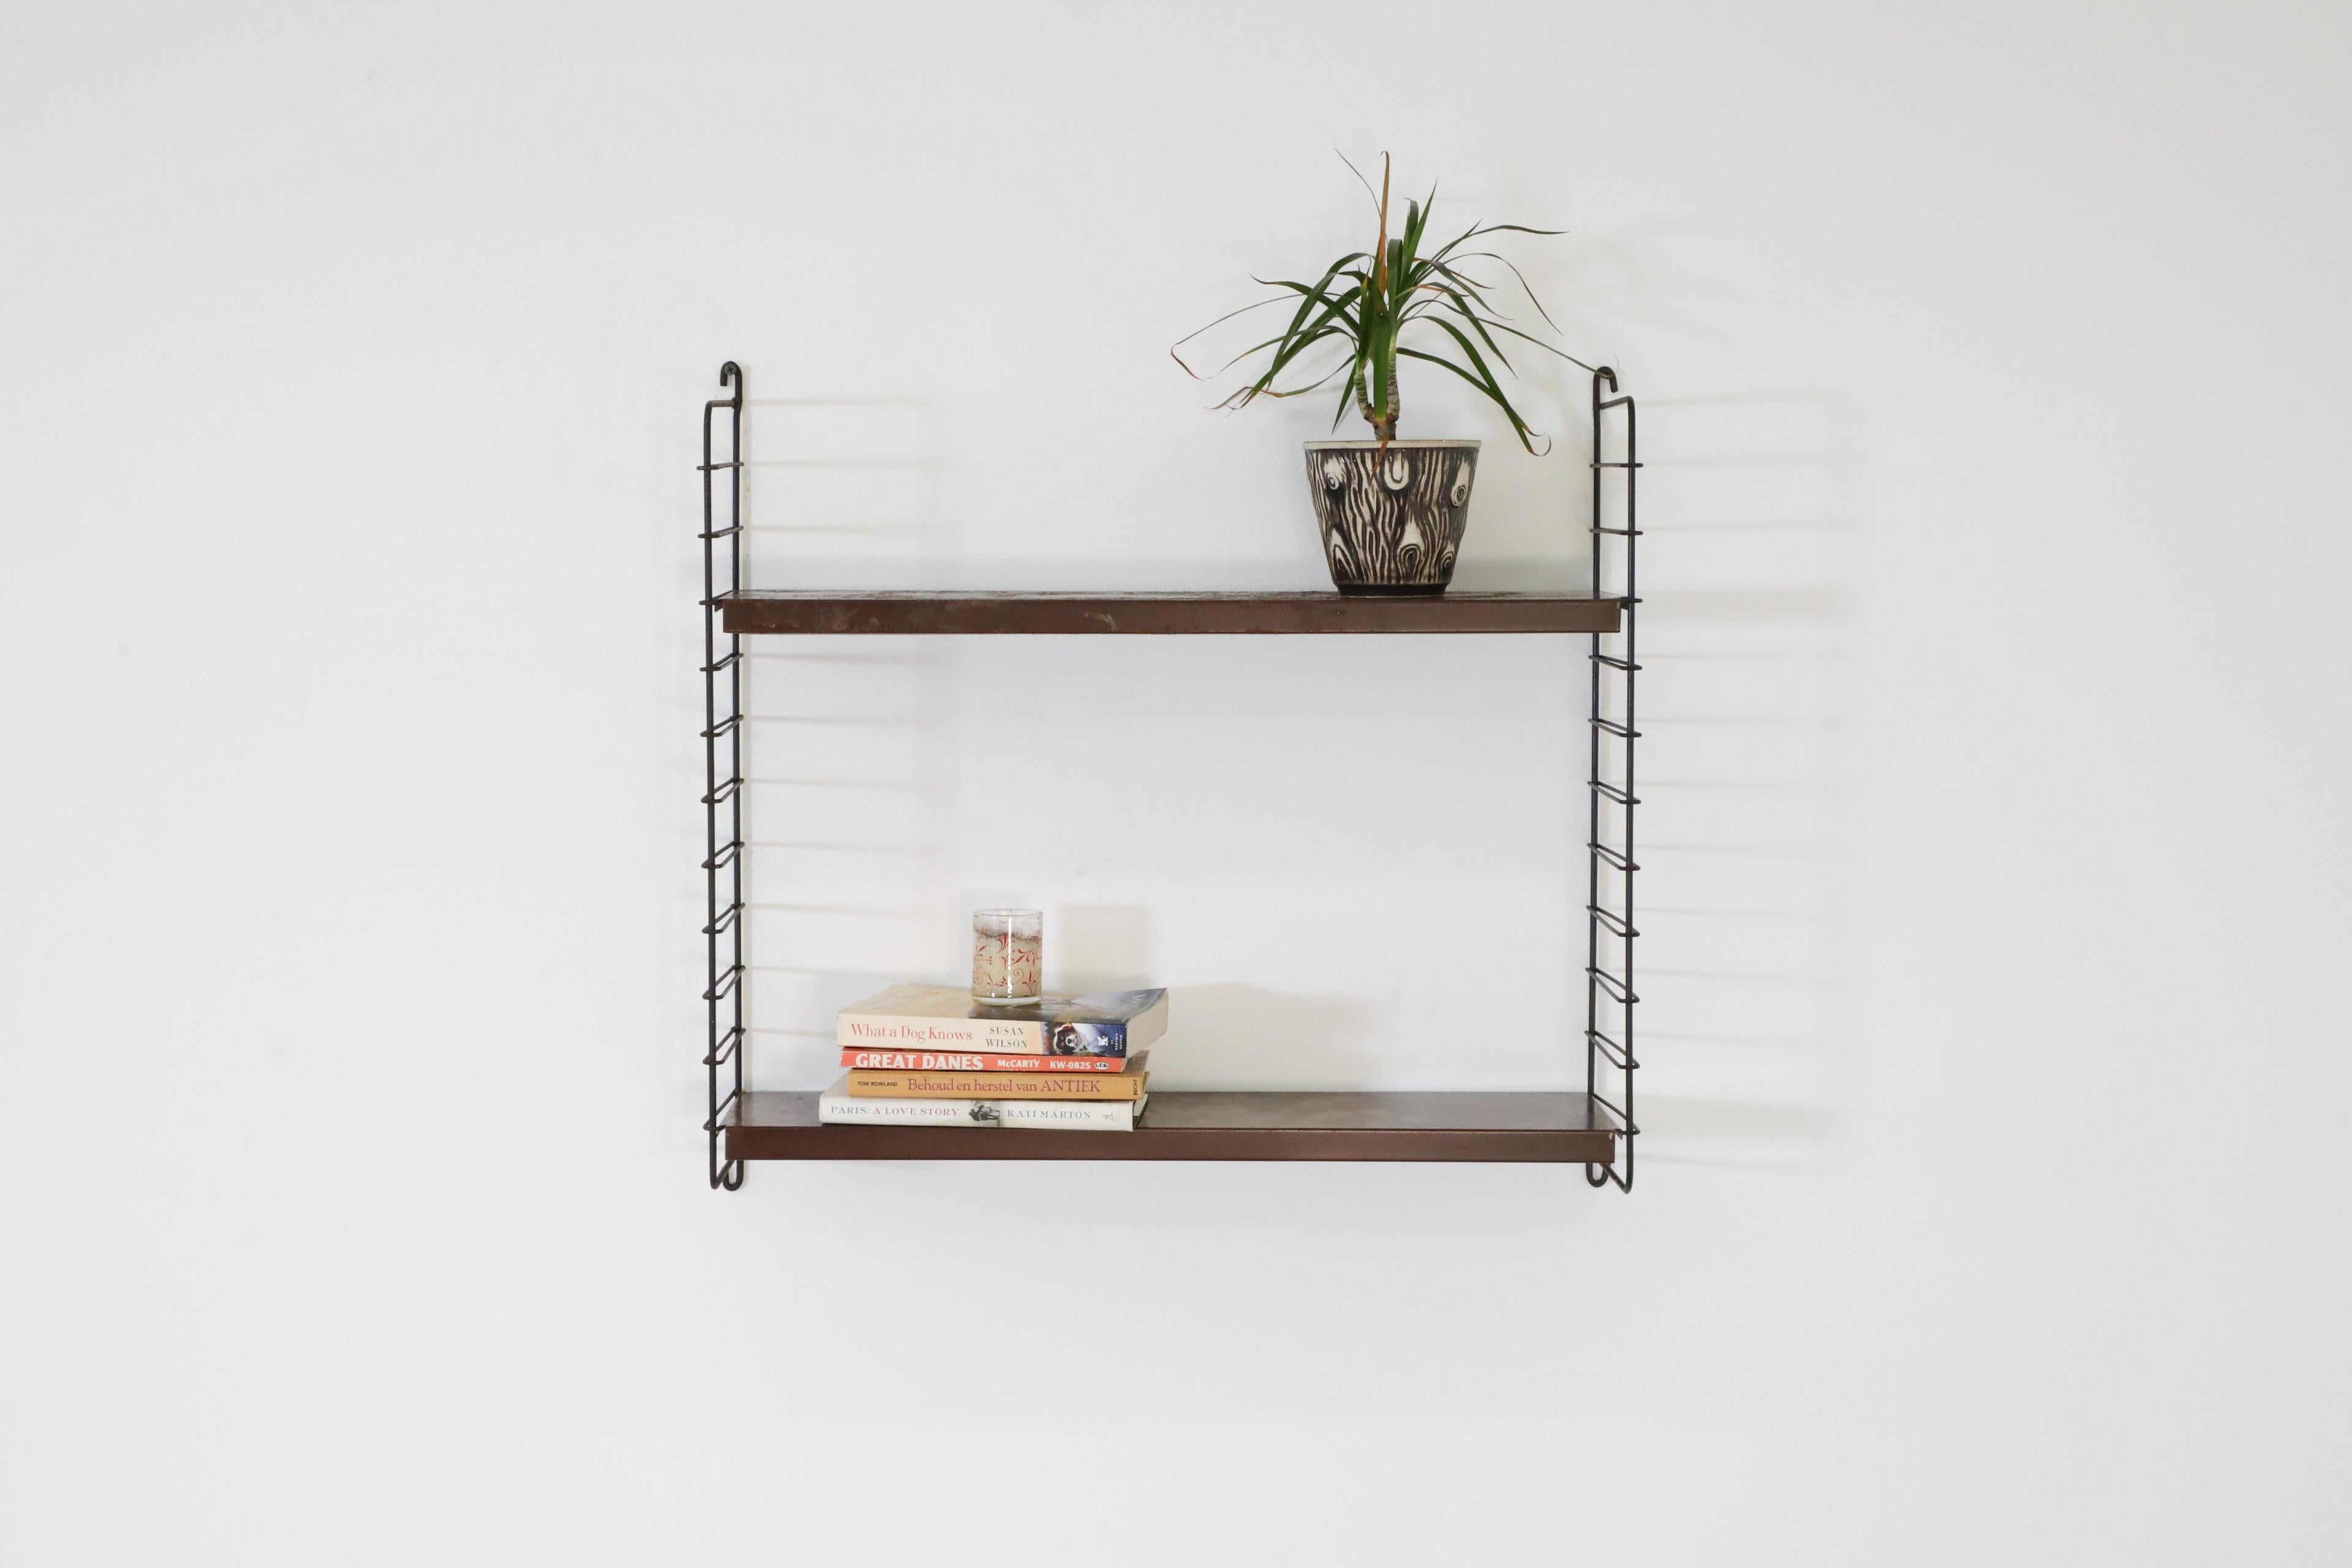 Dutch Mid-Century, single section, Tomado style, industrial wall mount shelving unit with handsome brown enameled metal shelves on black enameled wire risers. A lovely piece in very original condition with heavy visible wear including some enamel